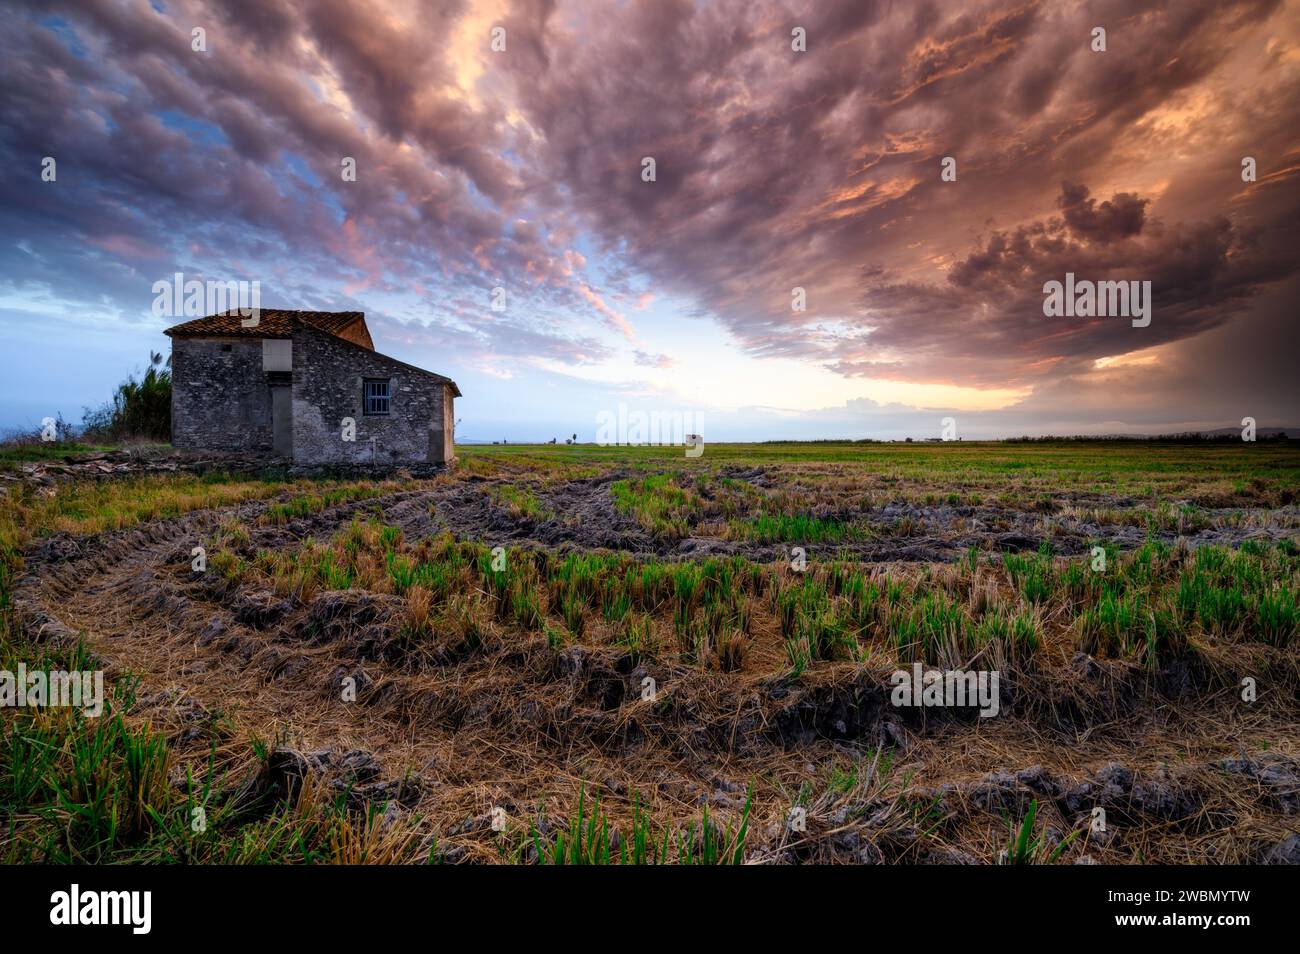 Sunset in the green rice fields near Valencia, Spain, with a rural cottage and spectacular stormy sky. Stock Photo